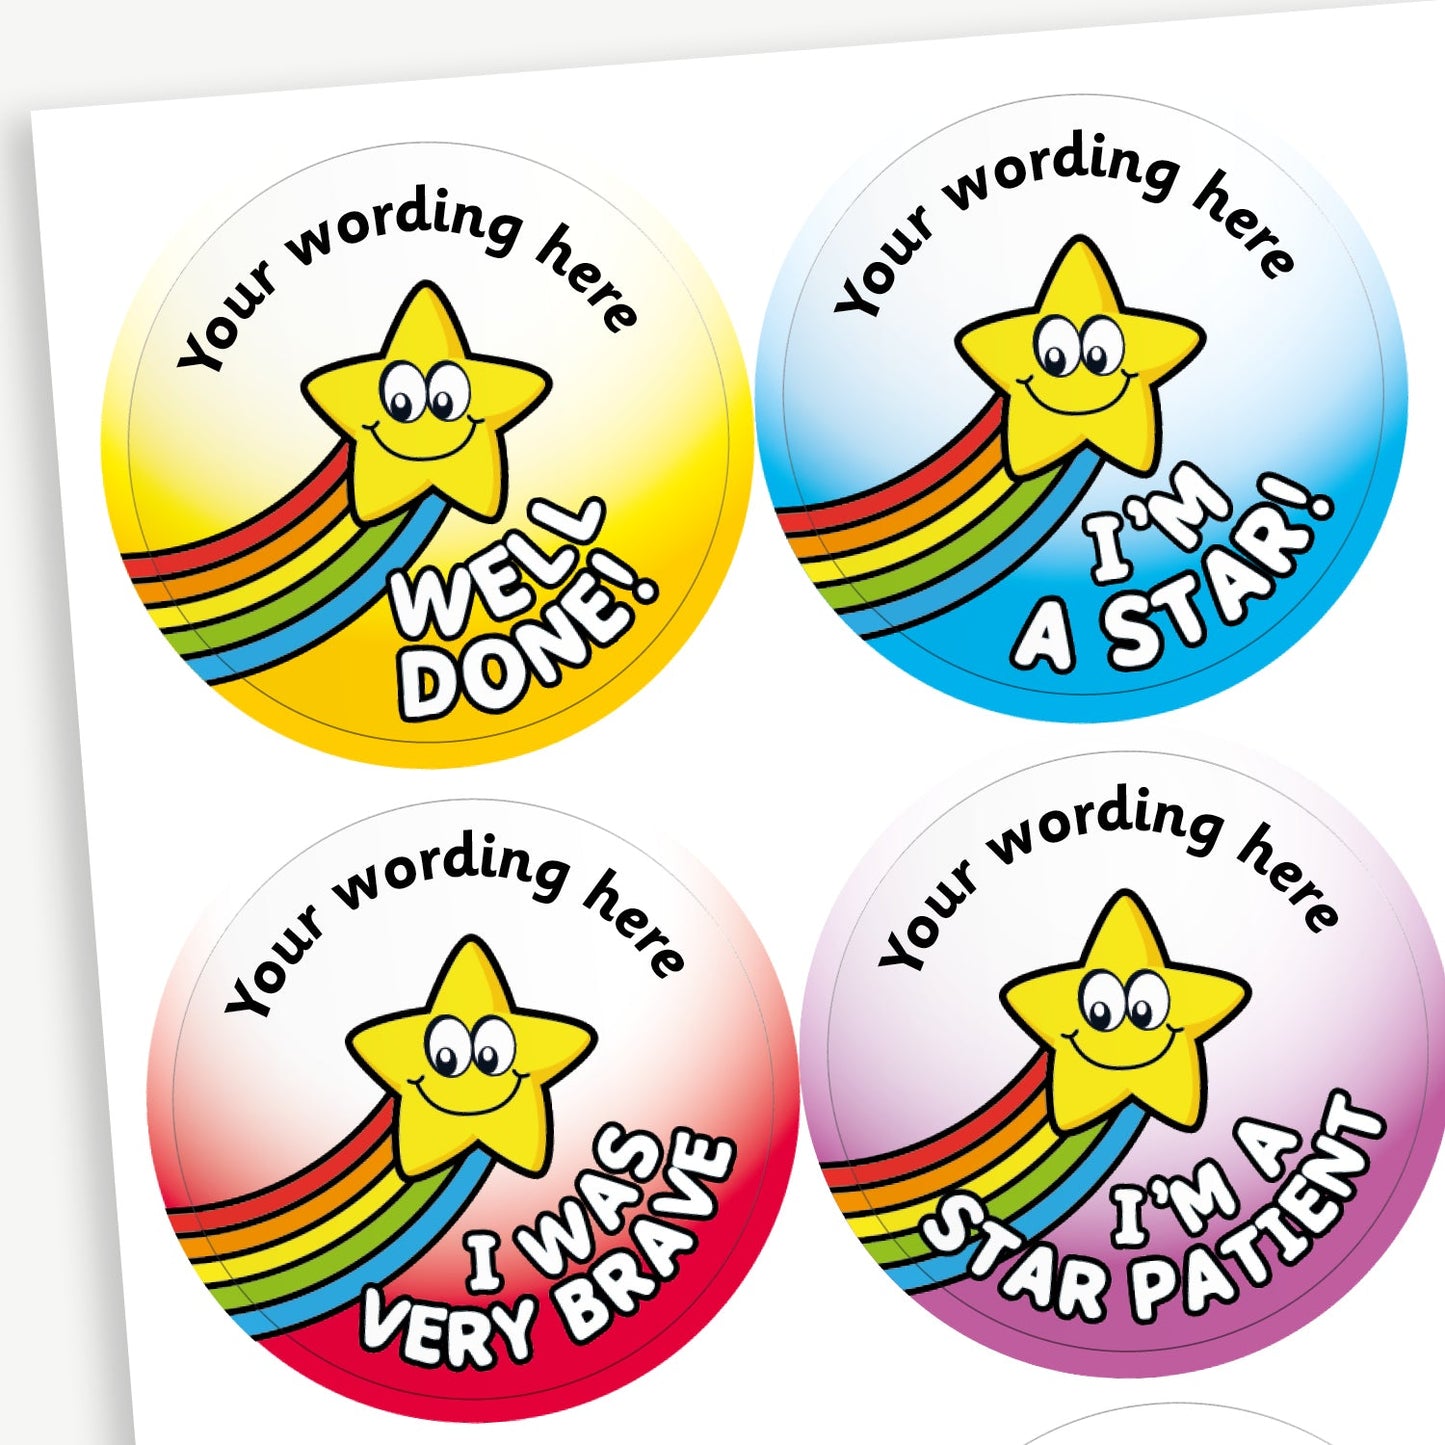 35 Personalised Healthcare Rainbow Star Stickers - 37mm